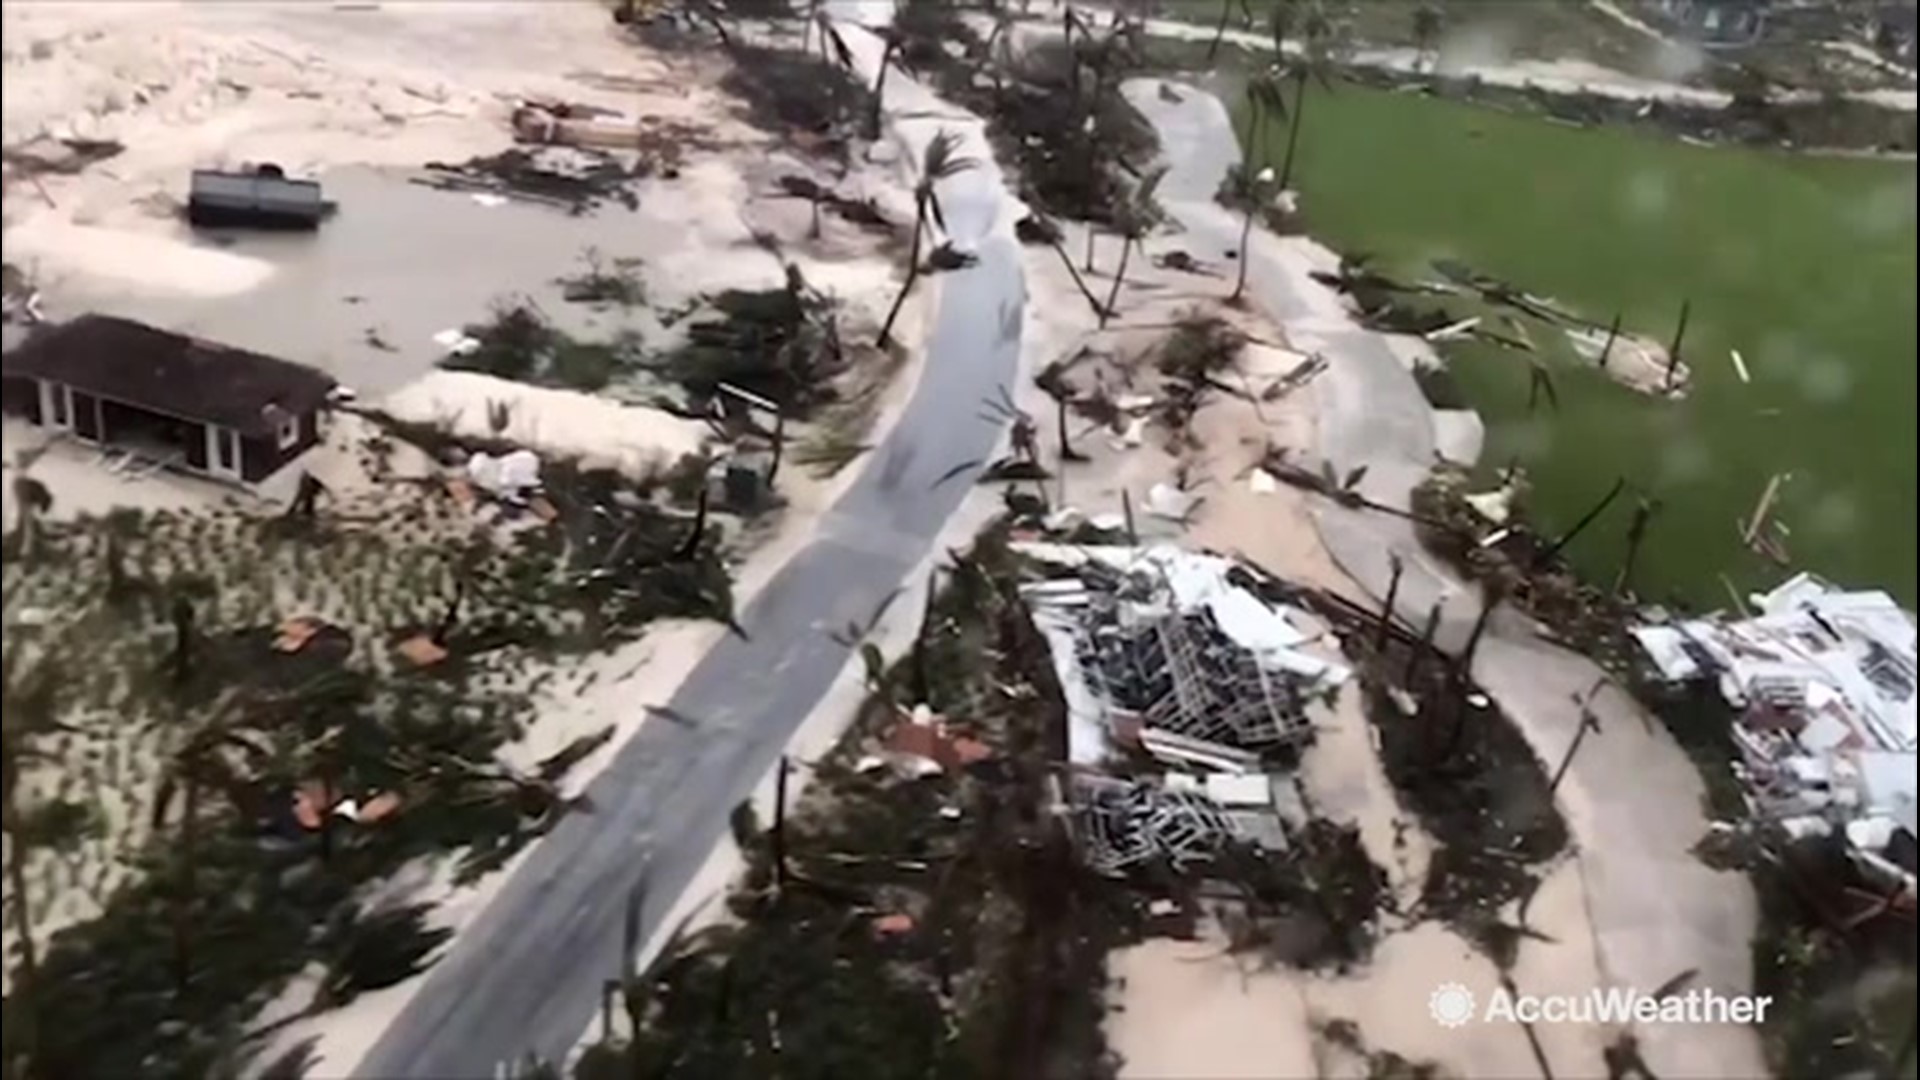 Video obtained exclusively by AccuWeather shows utter devastation in Marsh Harbour, one of the first places in the Bahamas ravaged by what was then Category 5 Hurricane Dorian.